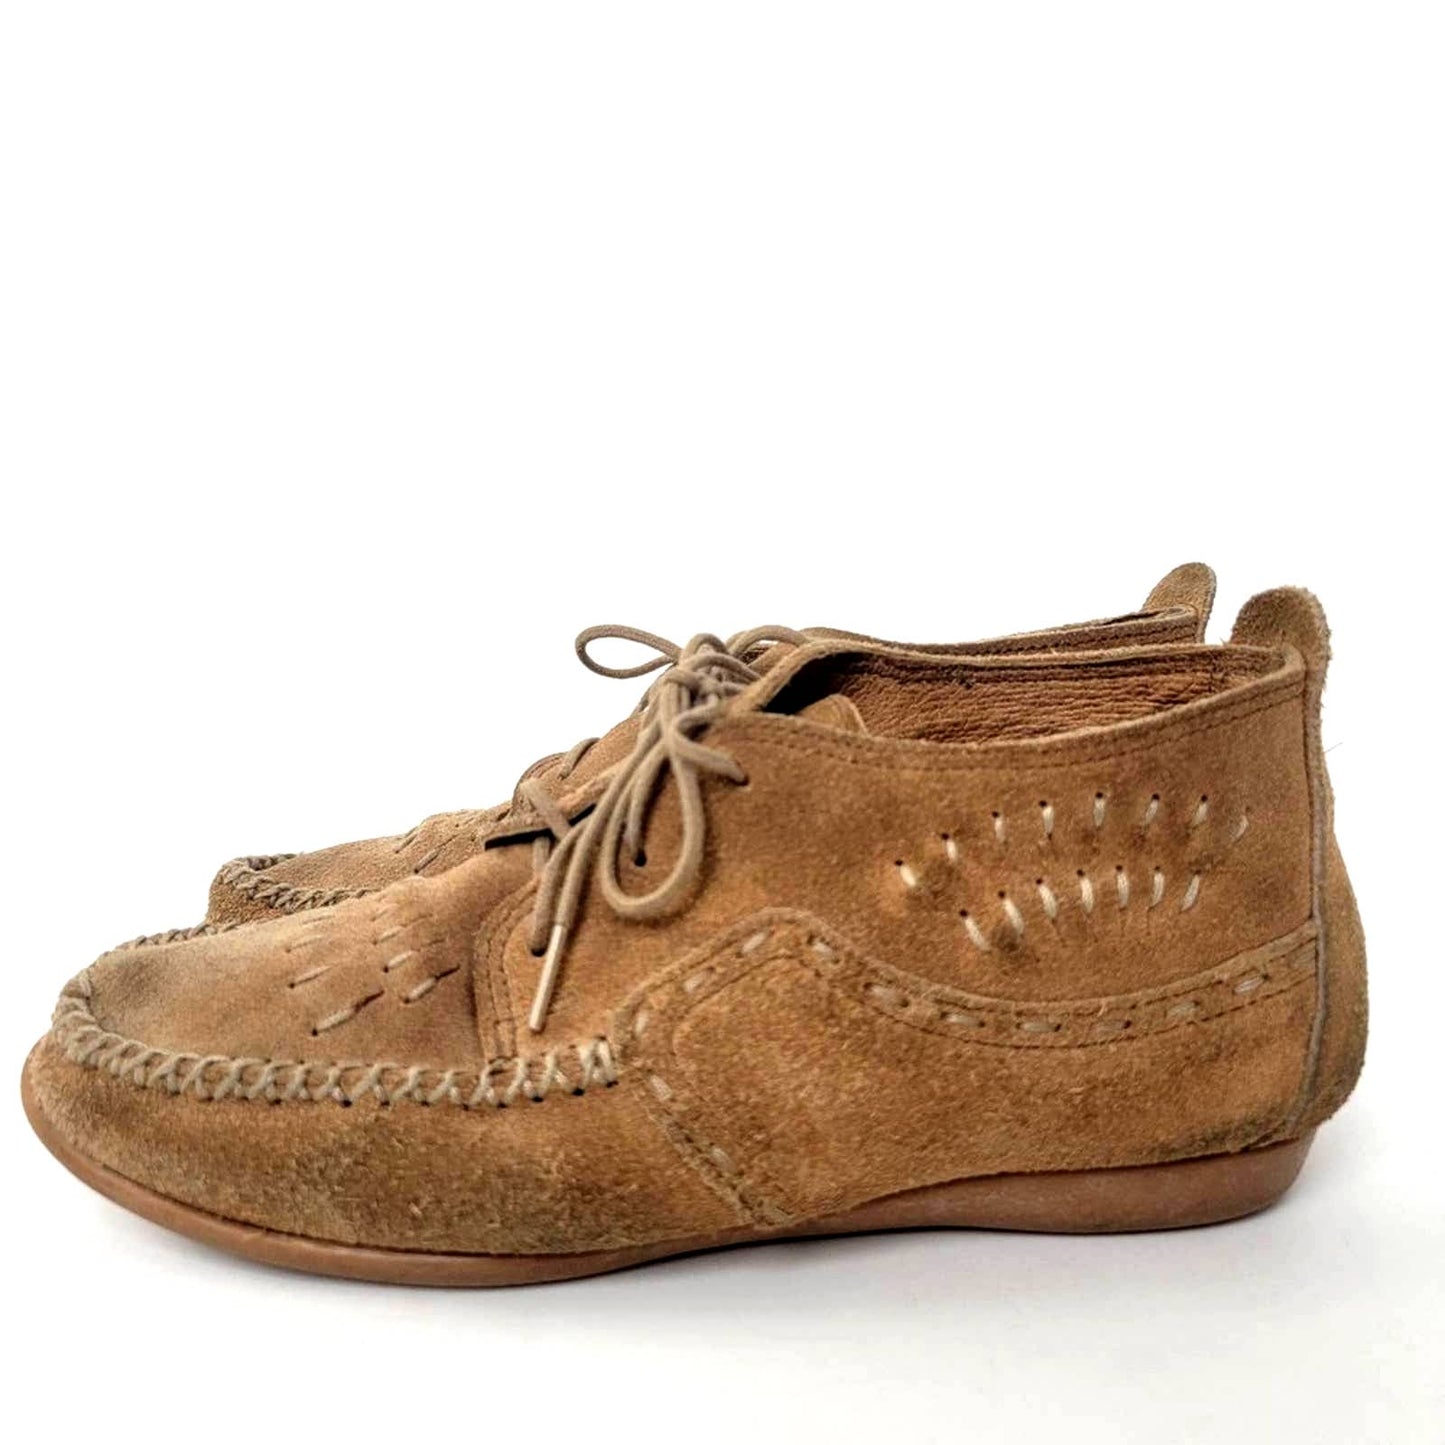 Minnetonka Brown Suede Ankle Moccassin Booties - 7.5